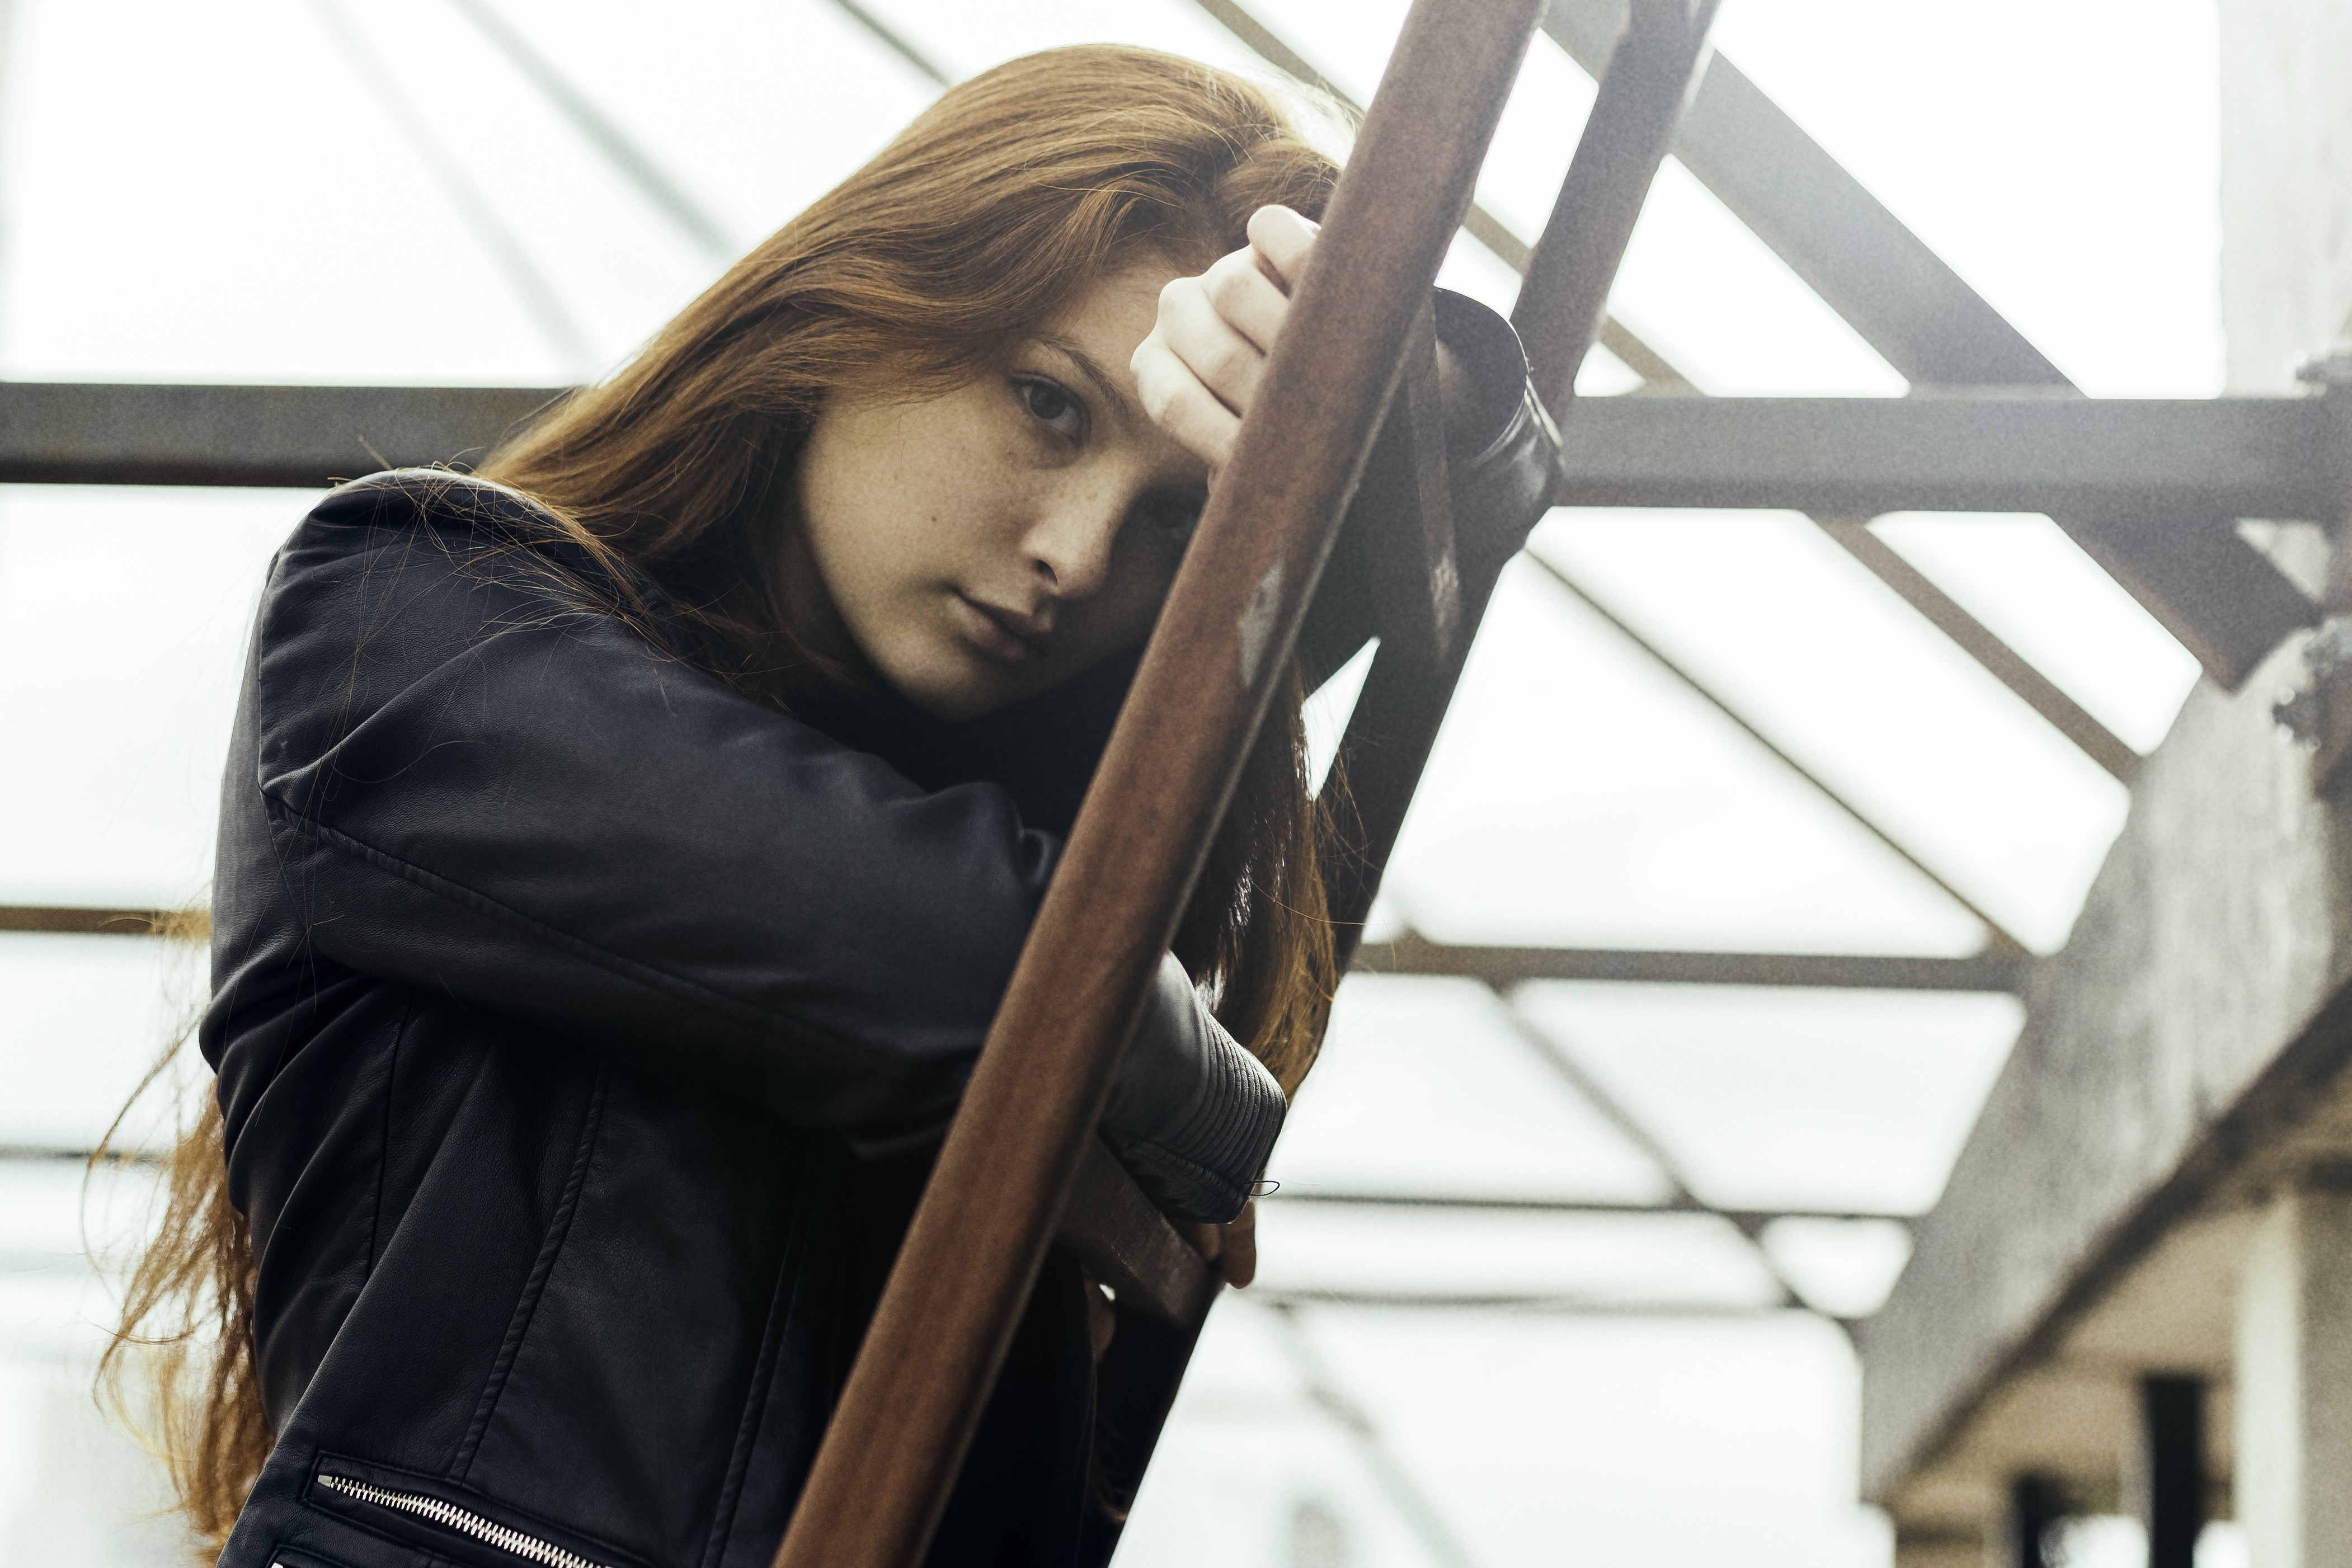 Redhead Ladders Long Hair Looking At Viewer Leather Jackets Women 4204x2803